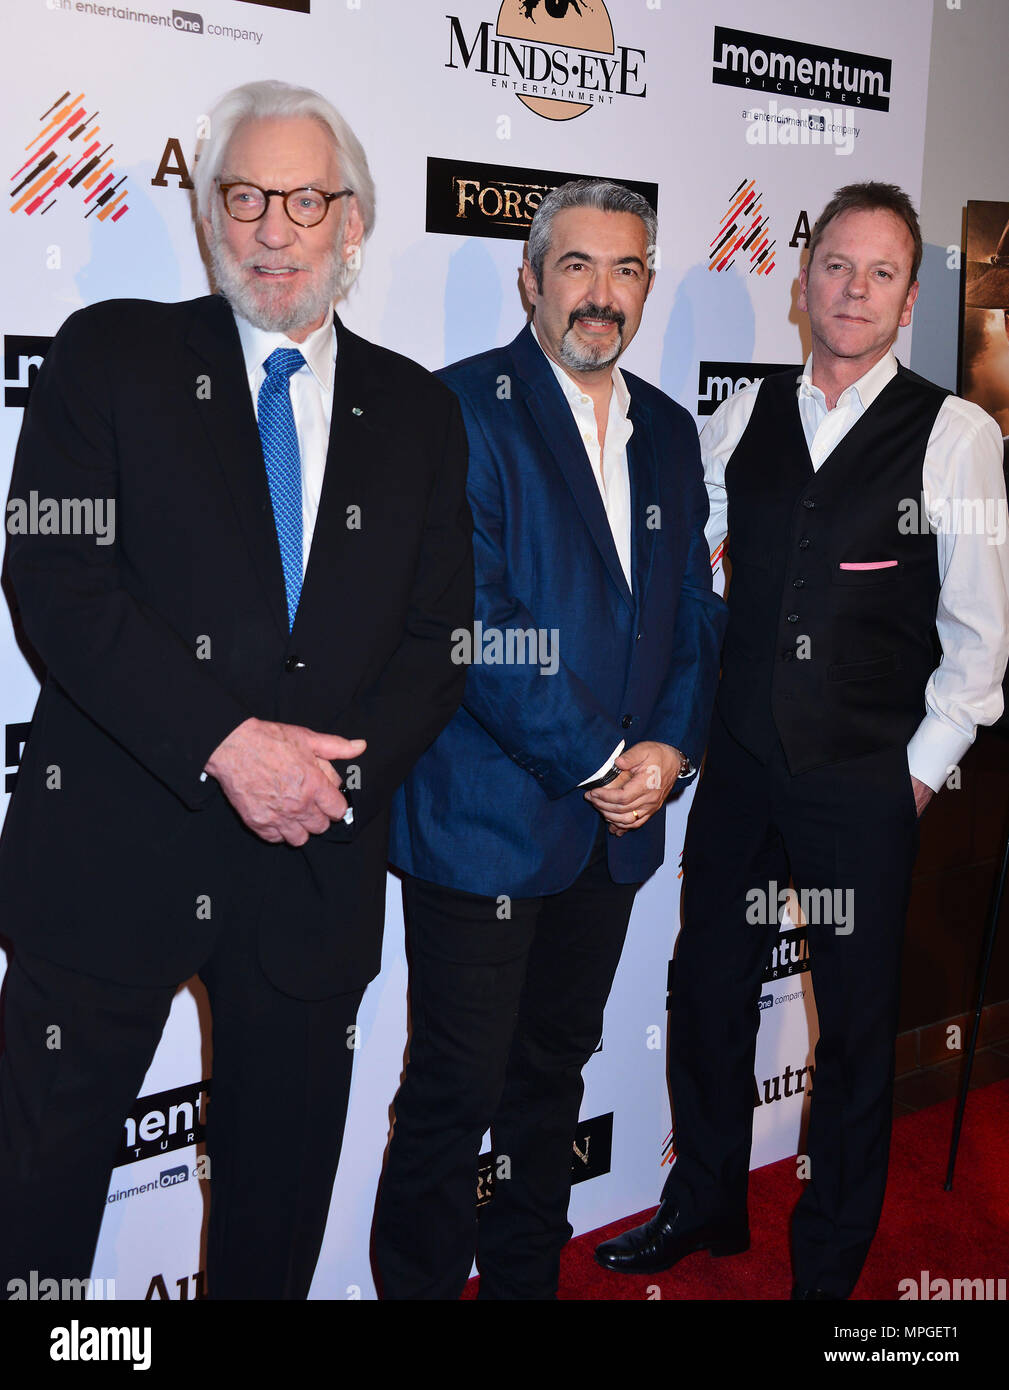 Donald Sutherland, Kiefer Sutherland and John Cassar - director 133 at Forsaken Premiere at the Autry Museum in Los Angeles. February 16, 2016.Donald Sutherland, Kiefer Sutherland and John Cassar - director 133  Event in Hollywood Life - California, Red Carpet Event, USA, Film Industry, Celebrities, Photography, Bestof, Arts Culture and Entertainment, Topix Celebrities fashion, Best of, Hollywood Life, Event in Hollywood Life - California, Red Carpet and backstage, movie celebrities, TV celebrities, Music celebrities, Arts Culture and Entertainment, vertical, one person, Photography,    inquir Stock Photo